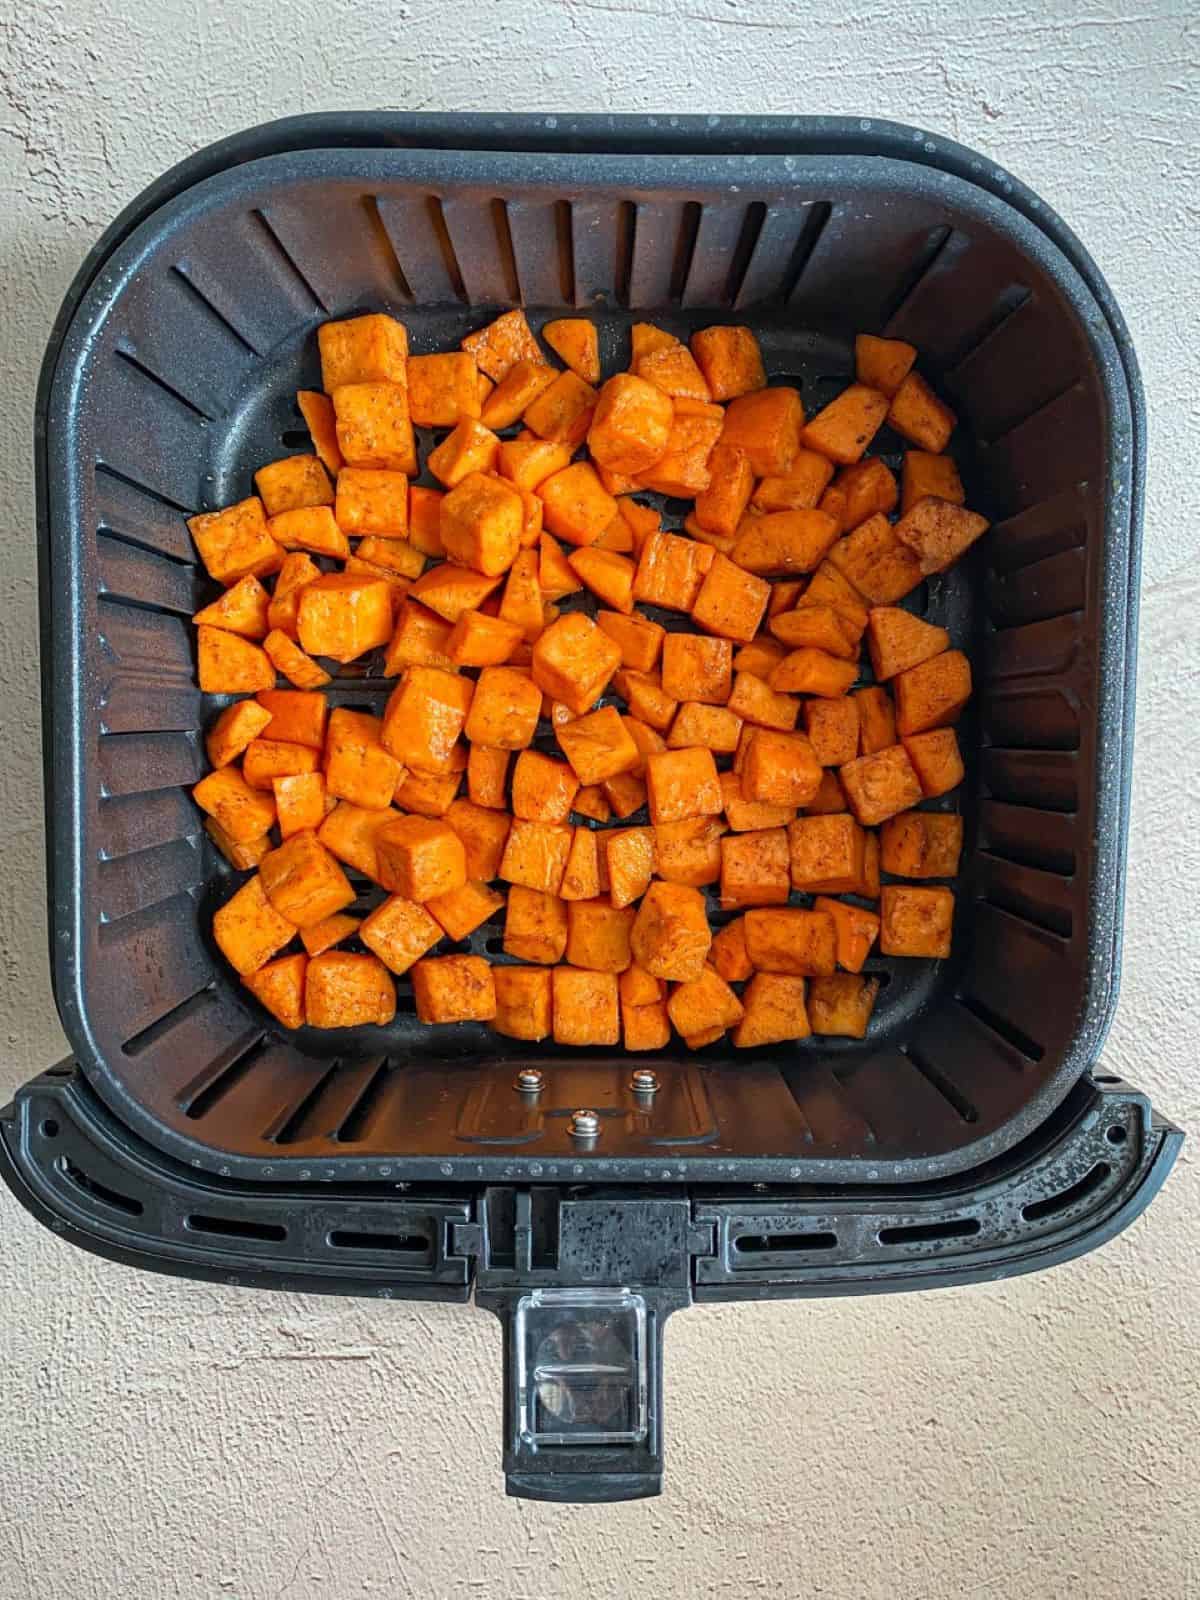 Diced and seasoned sweet potato are in a single layer in an air fryer basket.